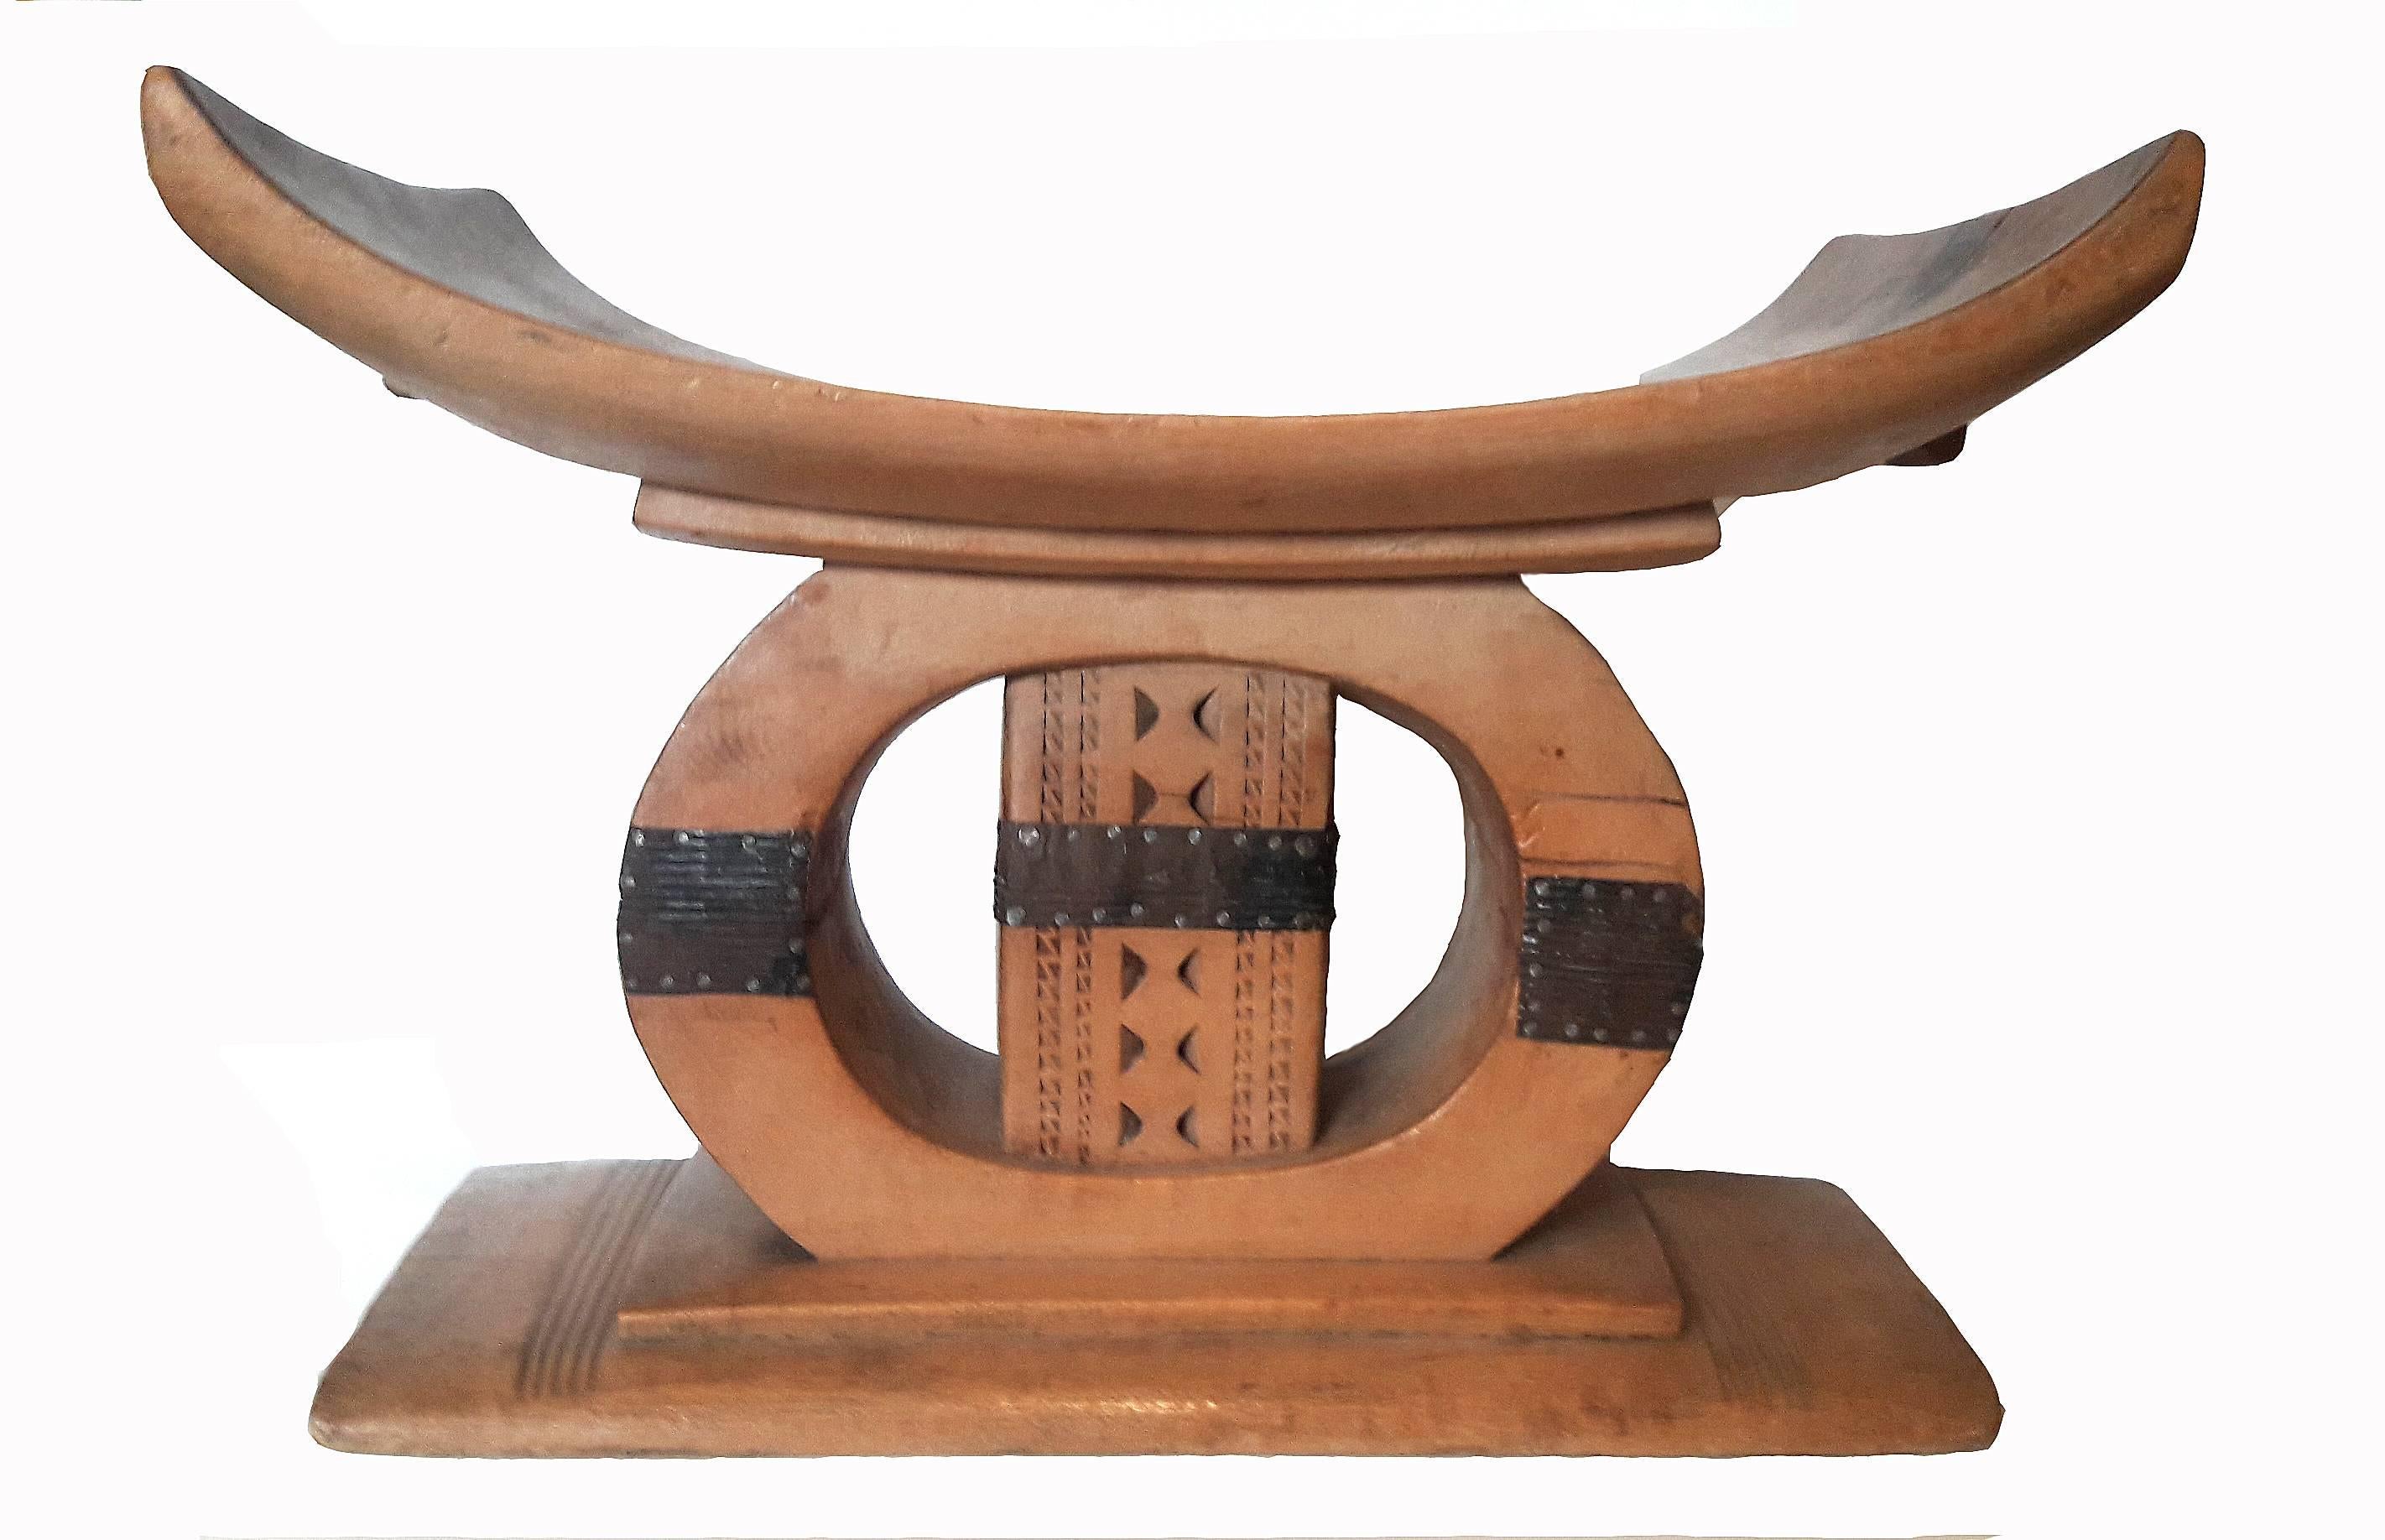 A vintage Ashanti stool from Ghana, hand-carved from a single piece of African mahogany, circa 1920. Traditional decorations. Metal bands. A singular piece that can be used as a low side table, or as an eye-catching element, adding an eclectic look